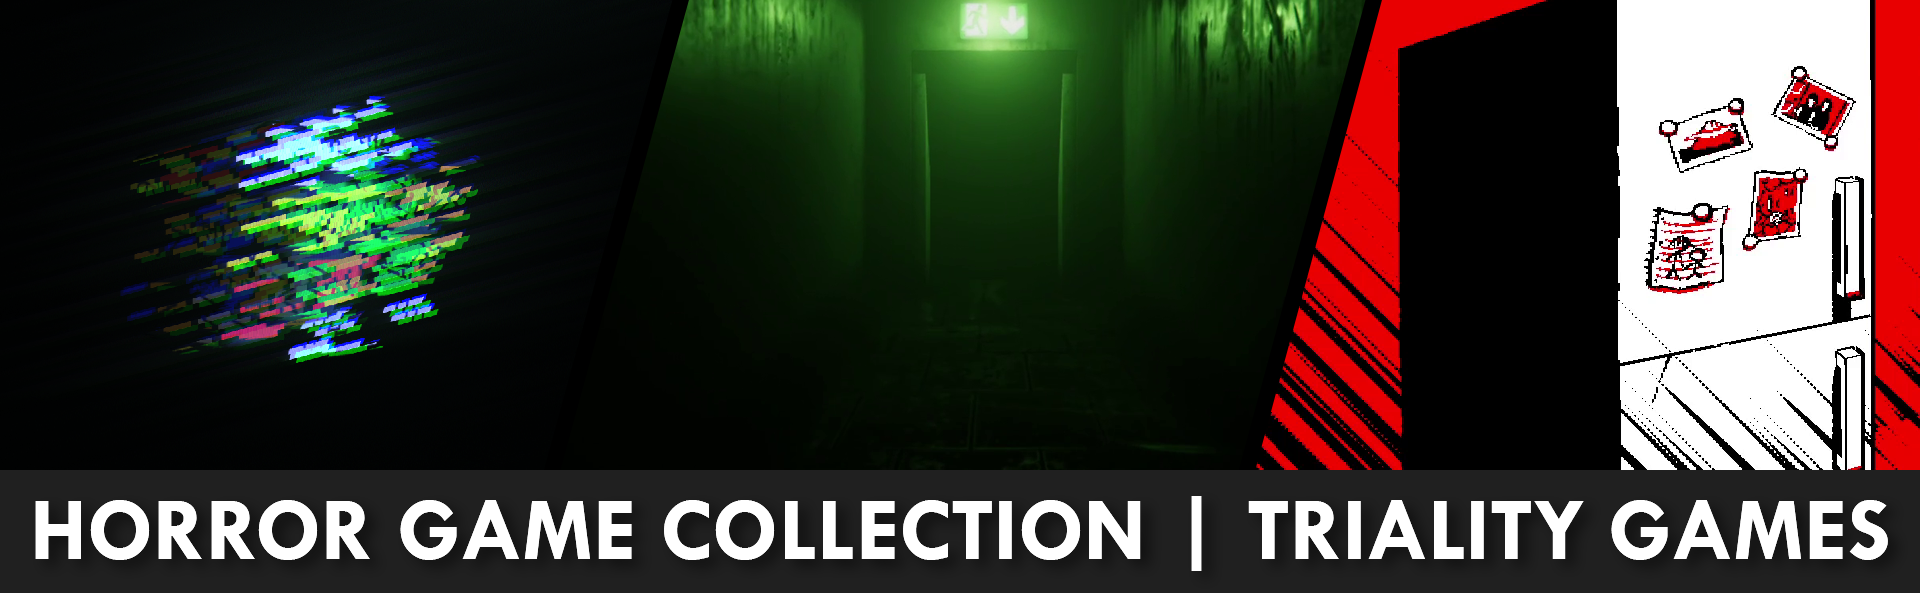 Horror Game Collection | Triality Games